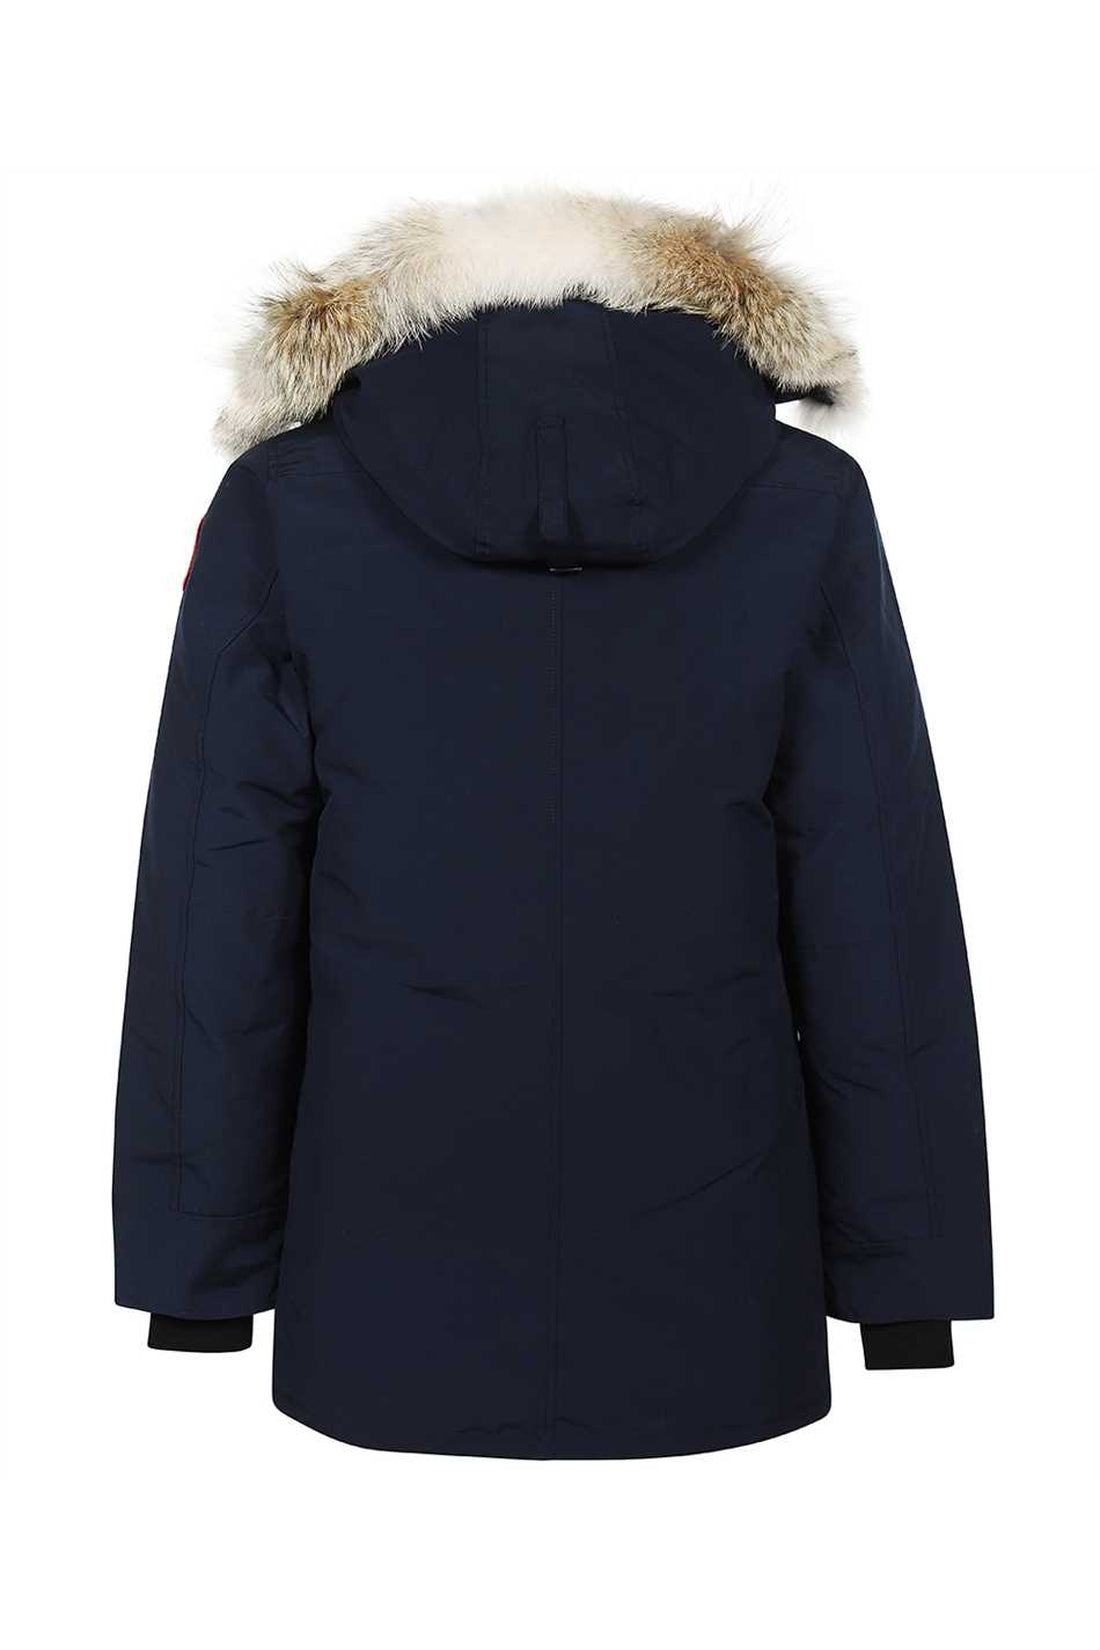 Canada Goose-OUTLET-SALE-Chateau hooded parka-ARCHIVIST